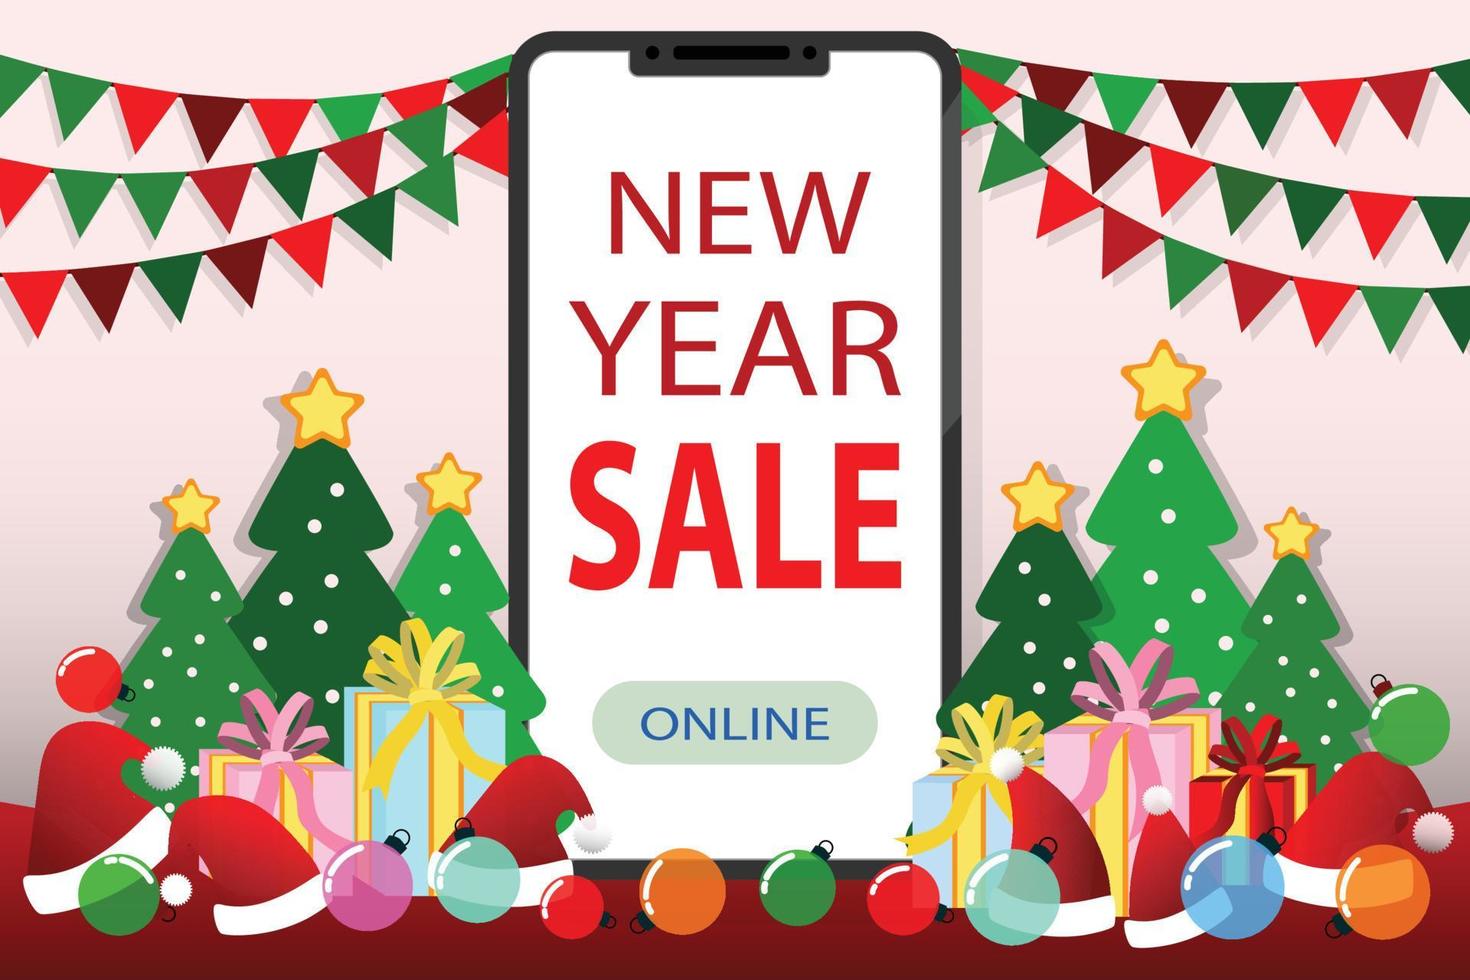 Christmas sale, New year sale, Santa claus on mobile phone with text BIG SALE gift, snow, star, Christmas tree, design for web banner, poster, Christmas invitation card and new year festival. vector